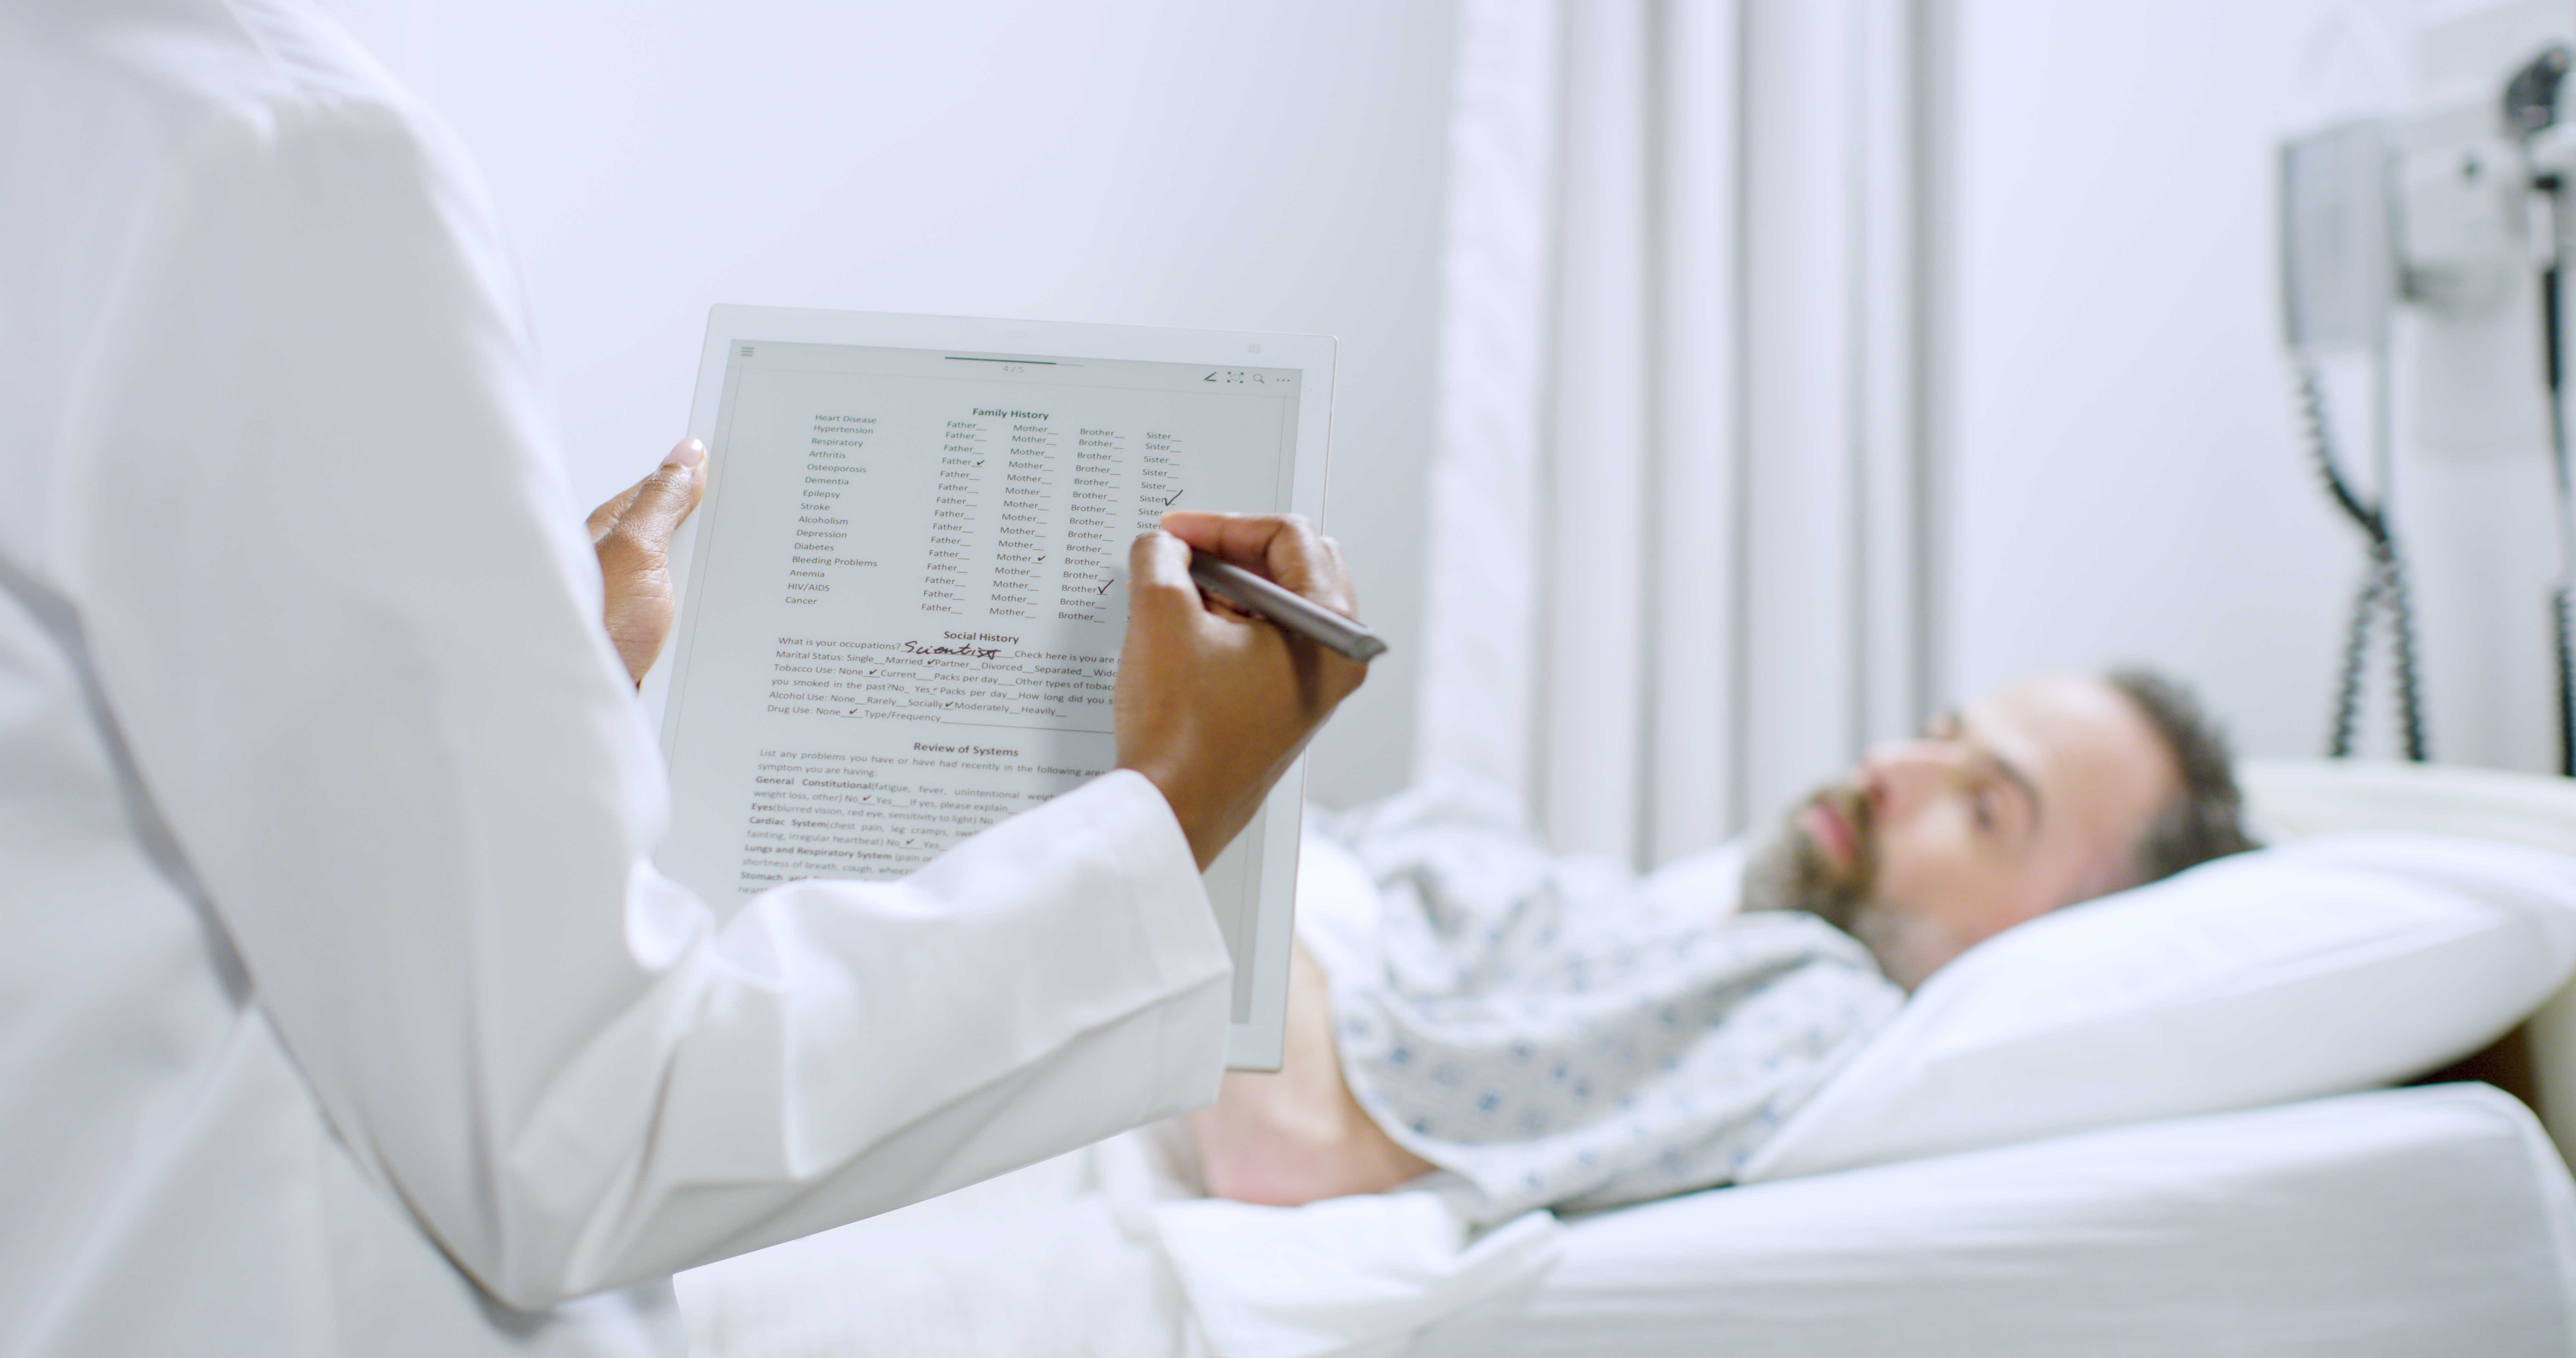 Digital Paper in Healthcare and Hospital Environments